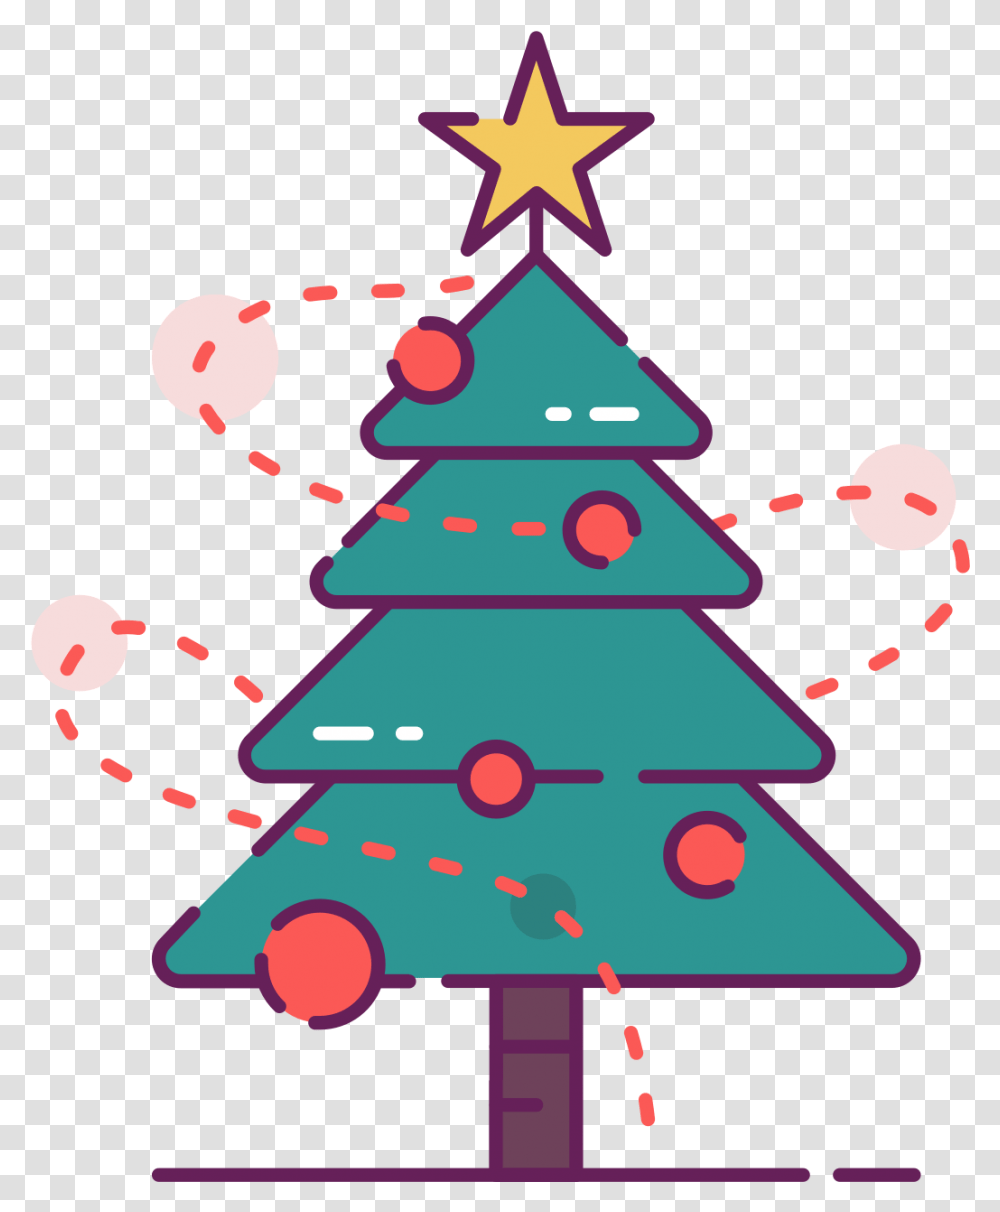 Decorated Christmas Tree Clip Art Christmas Tree Presents Christmas Tree, Plant, Ornament, Star Symbol Transparent Png